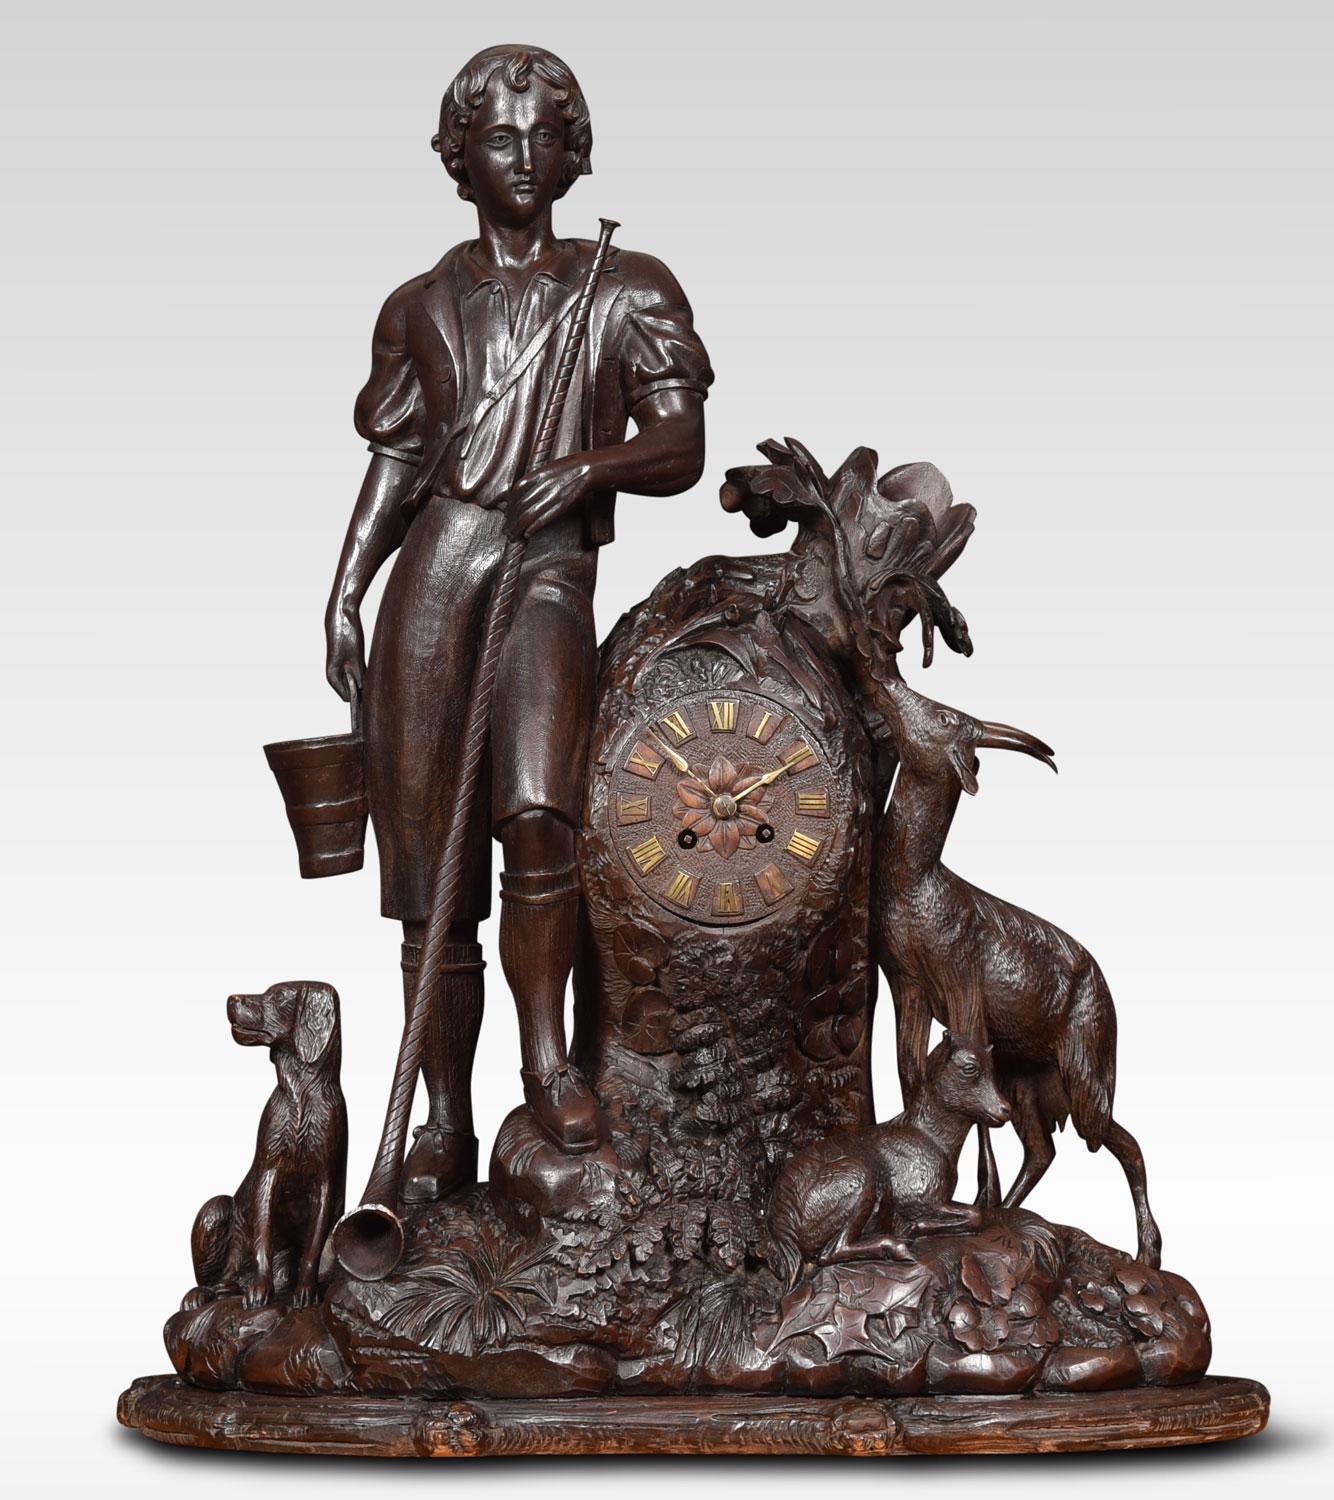 19th century black forest mantel clock, with carved wood dial to the French eight day two train movement striking on a bell. The case with goat-herd and his dog, with an ibex on mountainside.
Dimensions:
Height 27 inches
Width 23 inches
Depth 10